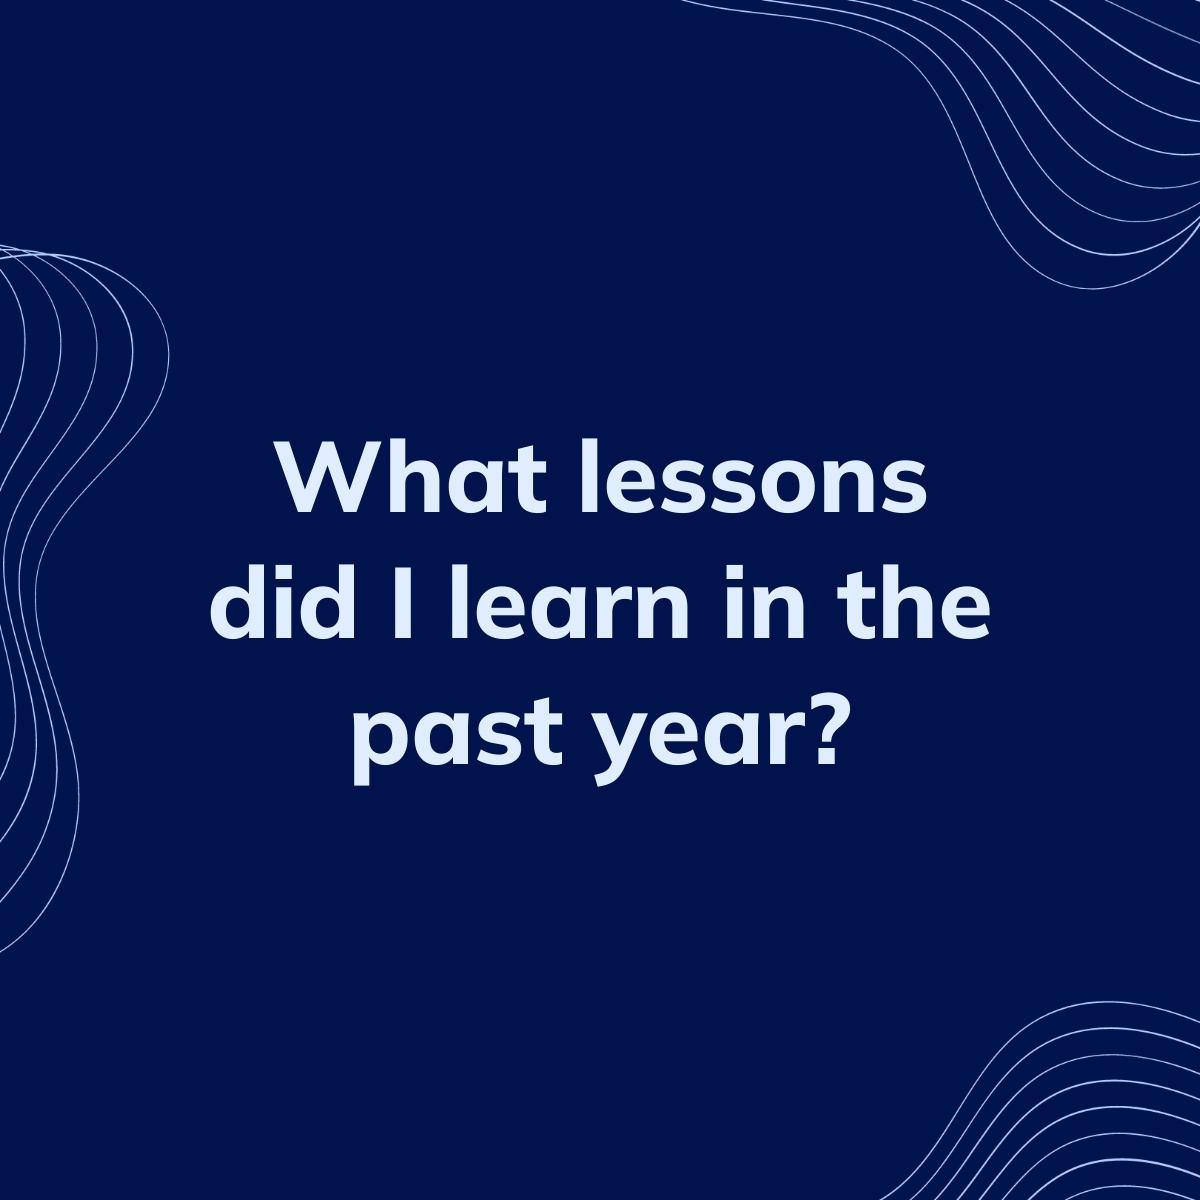 Journal Prompt: What lessons did I learn in the past year?